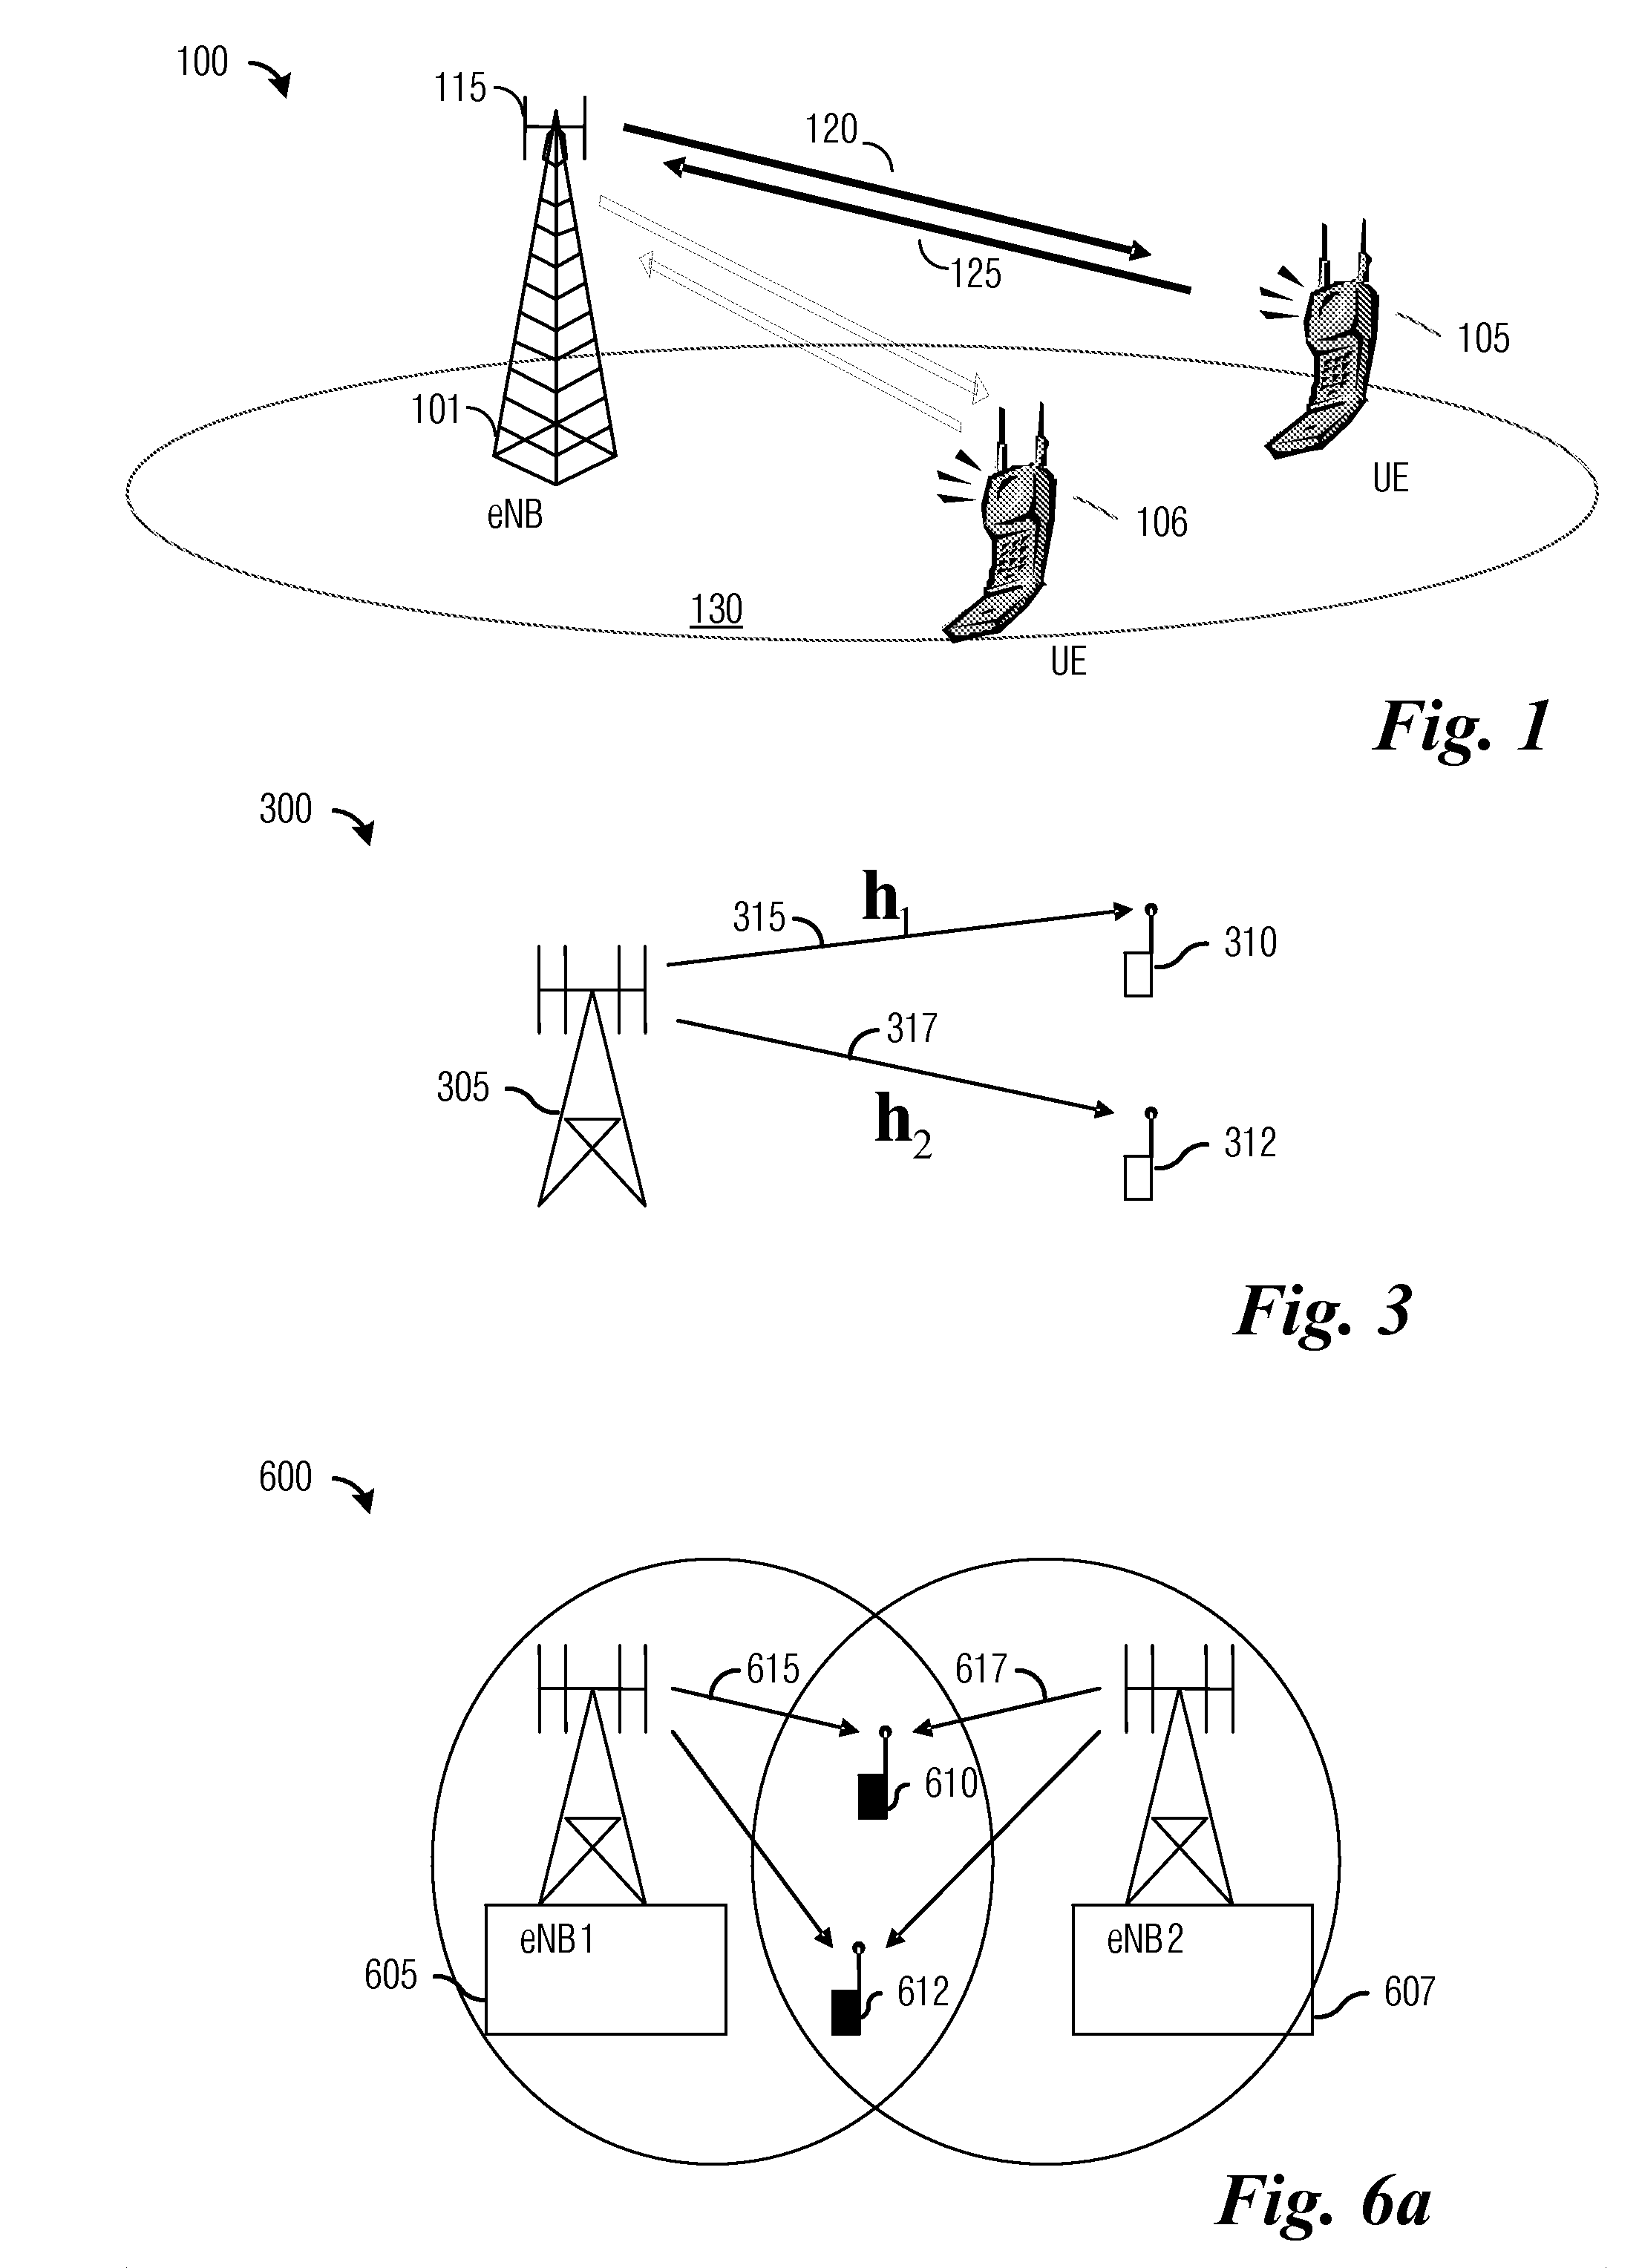 System and Method for Coordinated Spatial Multiplexing Using Second Order Statistical Information